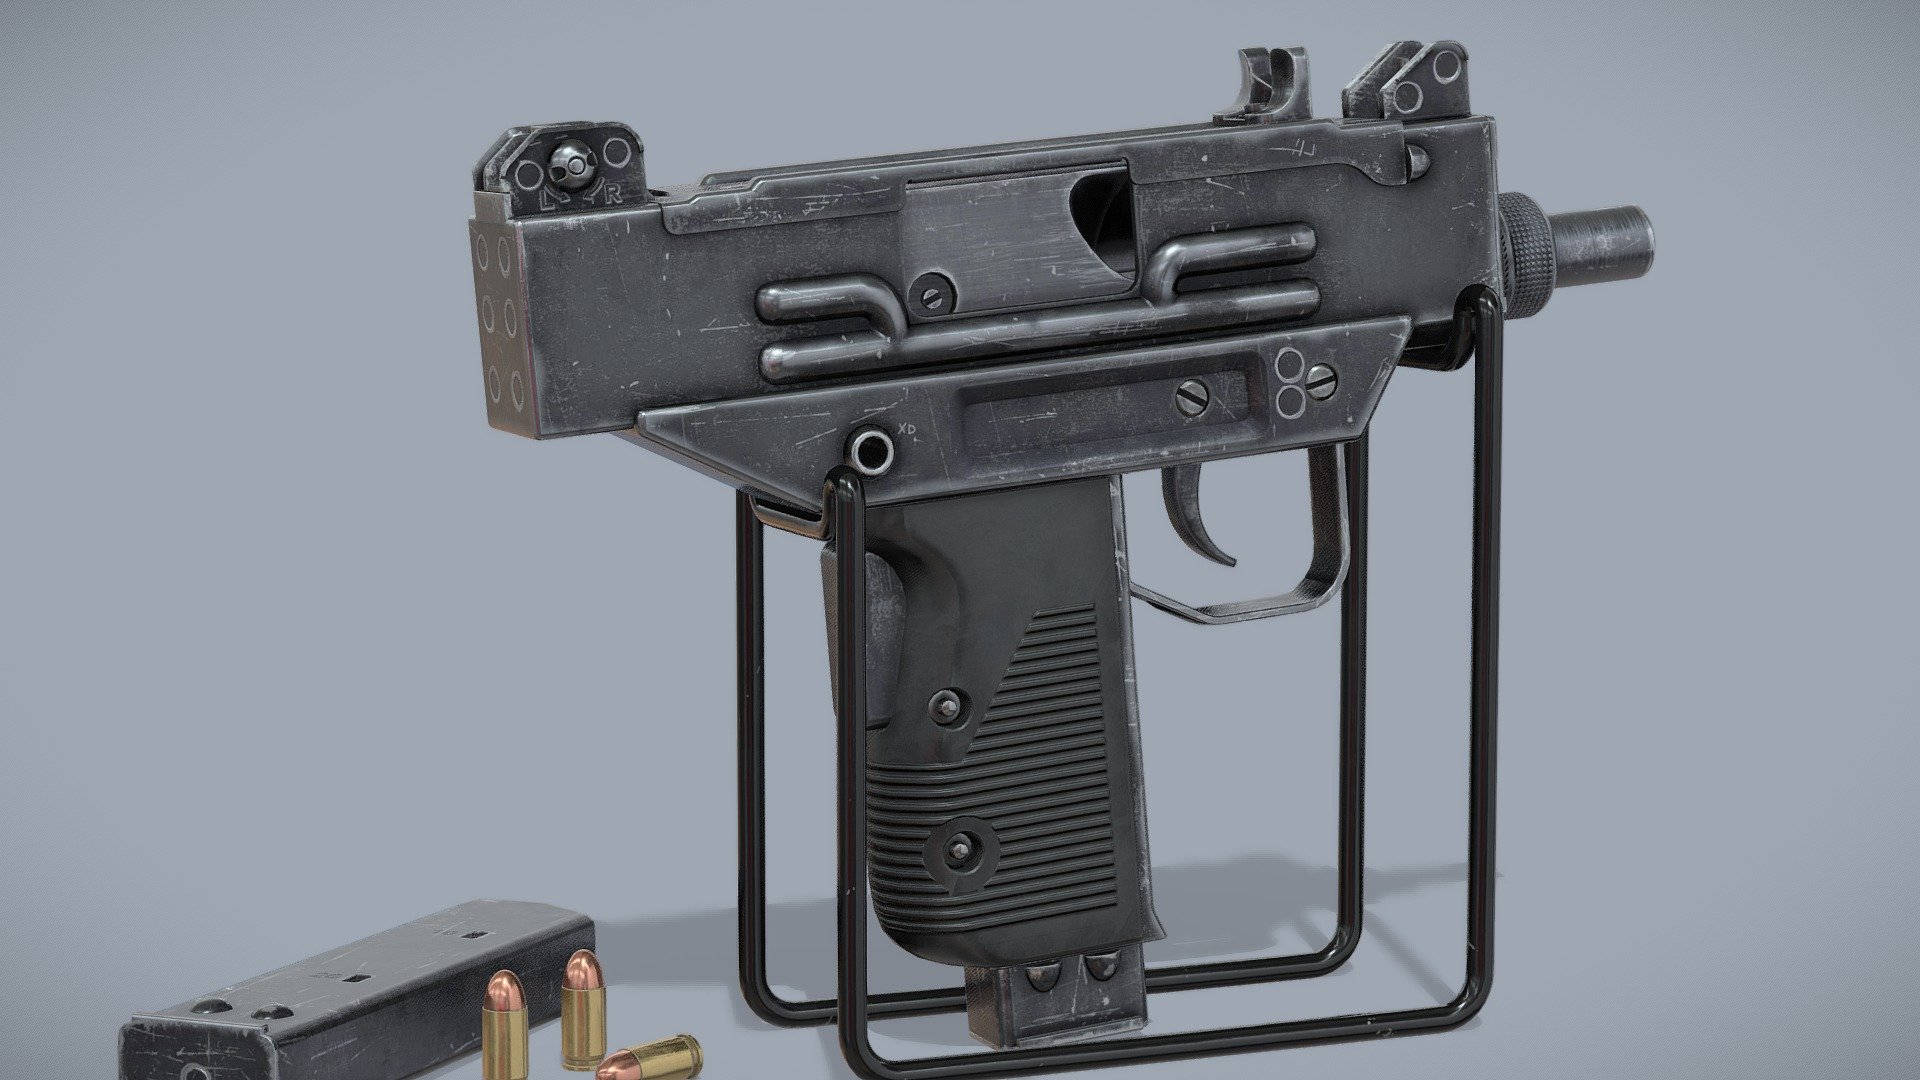 I created this Micro Uzi model from scratch using Maya, Substance Painter and Photoshop.  I have always loved the boxy design of this gun so I decided to create my own in 3D!  Let me know what you think :D

&ldquo;The Uzi pistol is a semi-automatic, closed bolt, and blowback-operated pistol variant. Its muzzle velocity is 345 m/s. It is a Micro Uzi with no shoulder stock or full-automatic firing capability.